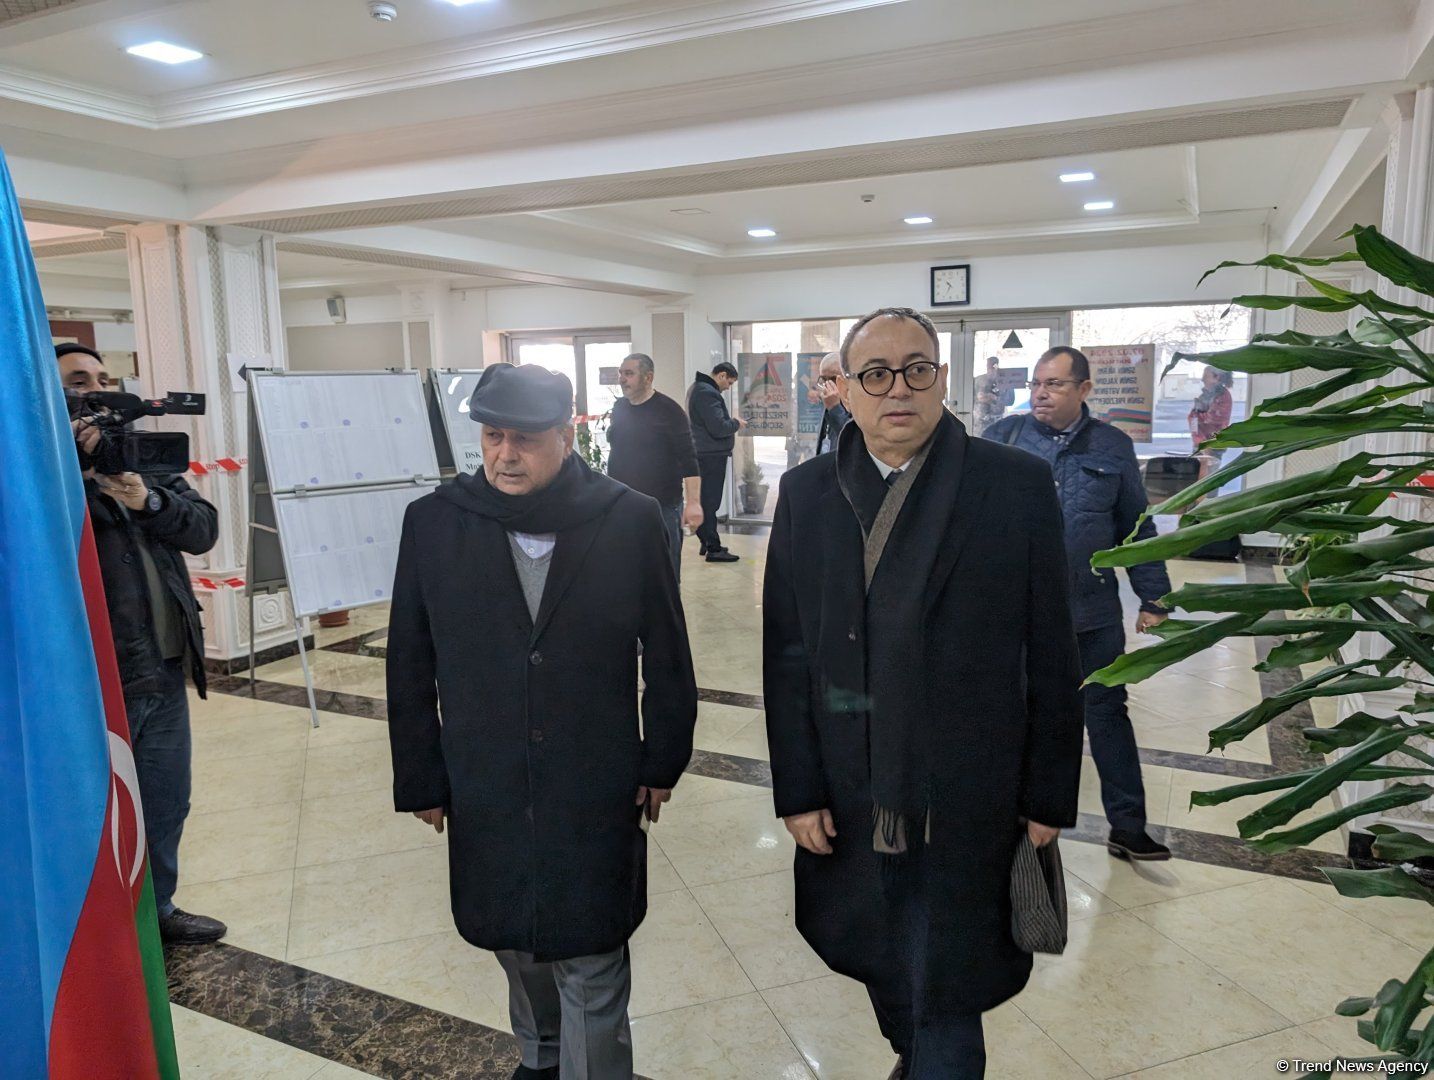 Asian Parliamentary Assembly arrives to observe presidential election in Azerbaijan [PHOTOS]